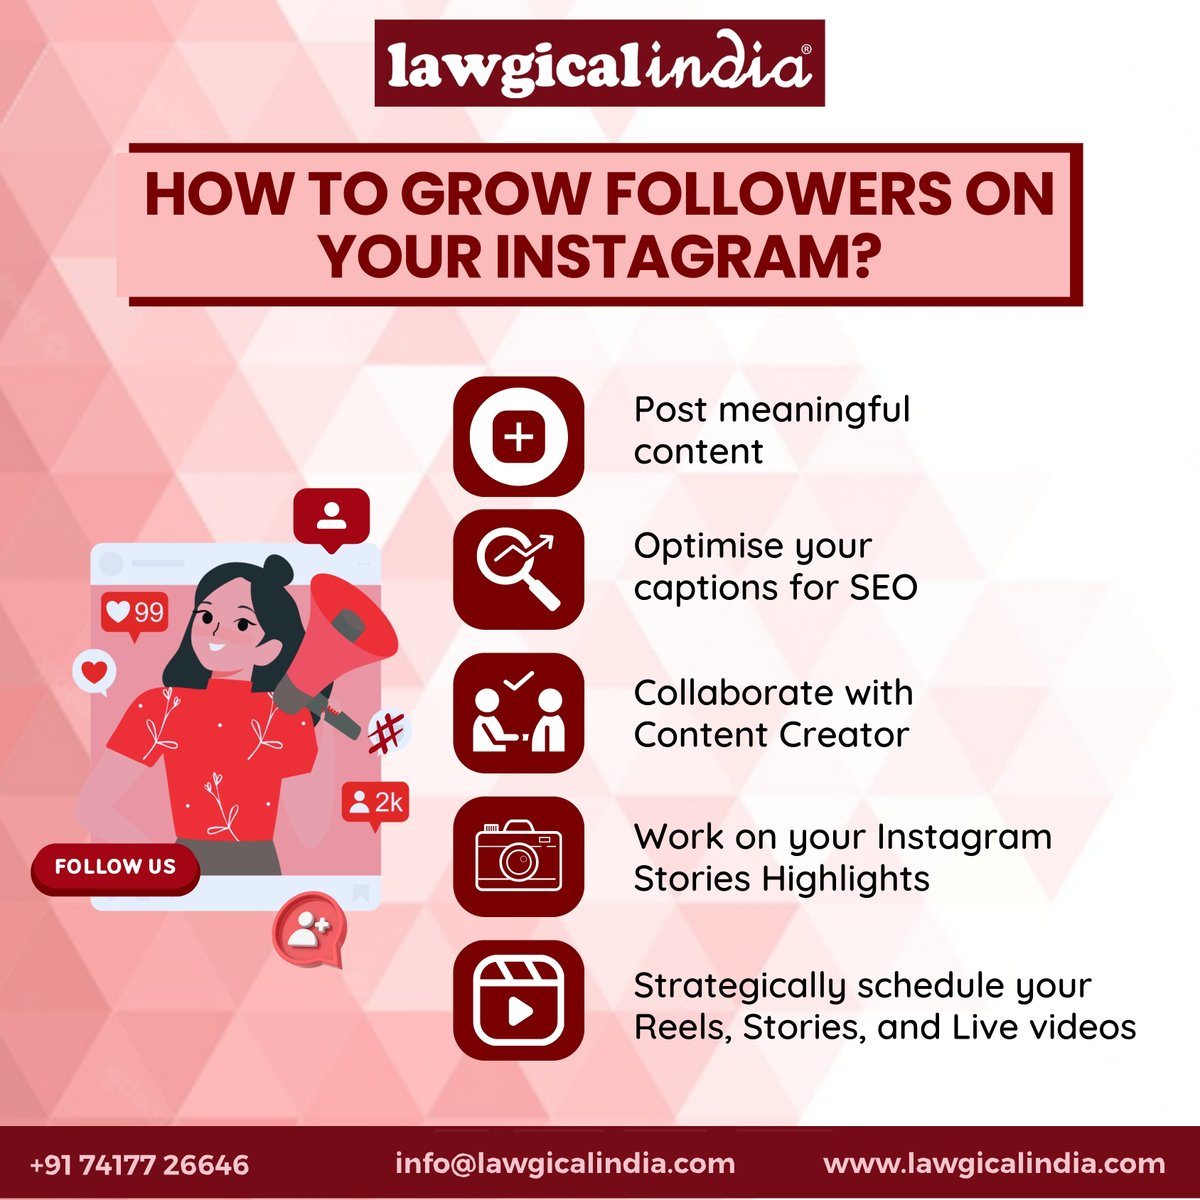 Get ready to have a sky-rocketed #Engagement rate on #Instagram!!!
With the experts of #LawgicalIndia, you can trust efficient #digitalmarketing techniques and other business services including #MSME registration, #GST registration, and beyond.

#seo #contentcreator #reelsviral